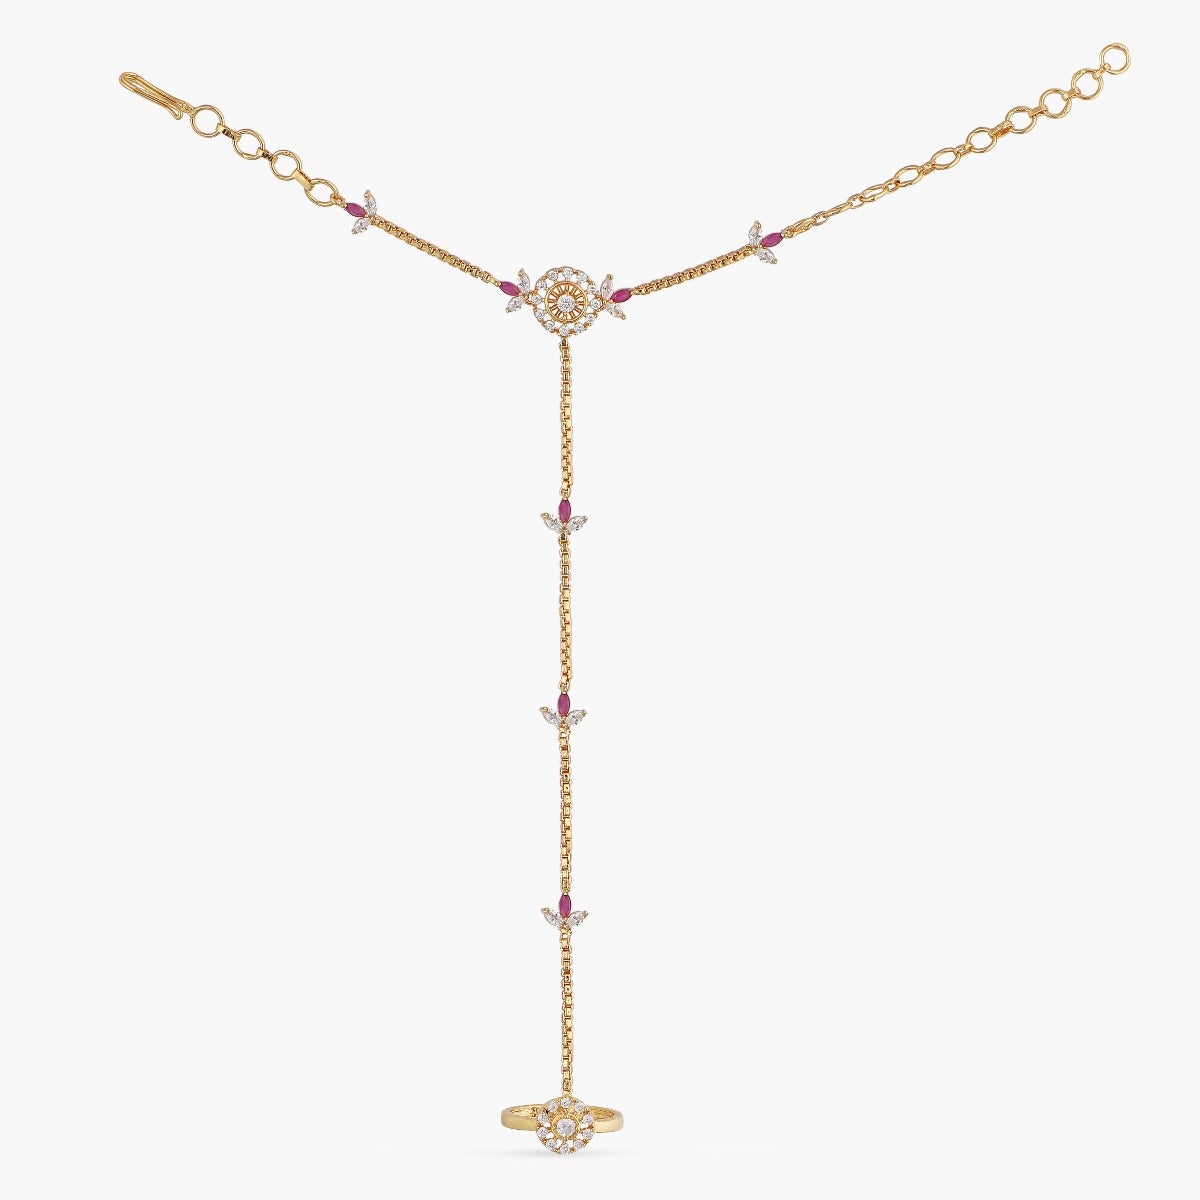 Nera CZ Gold Plated Hand Chain